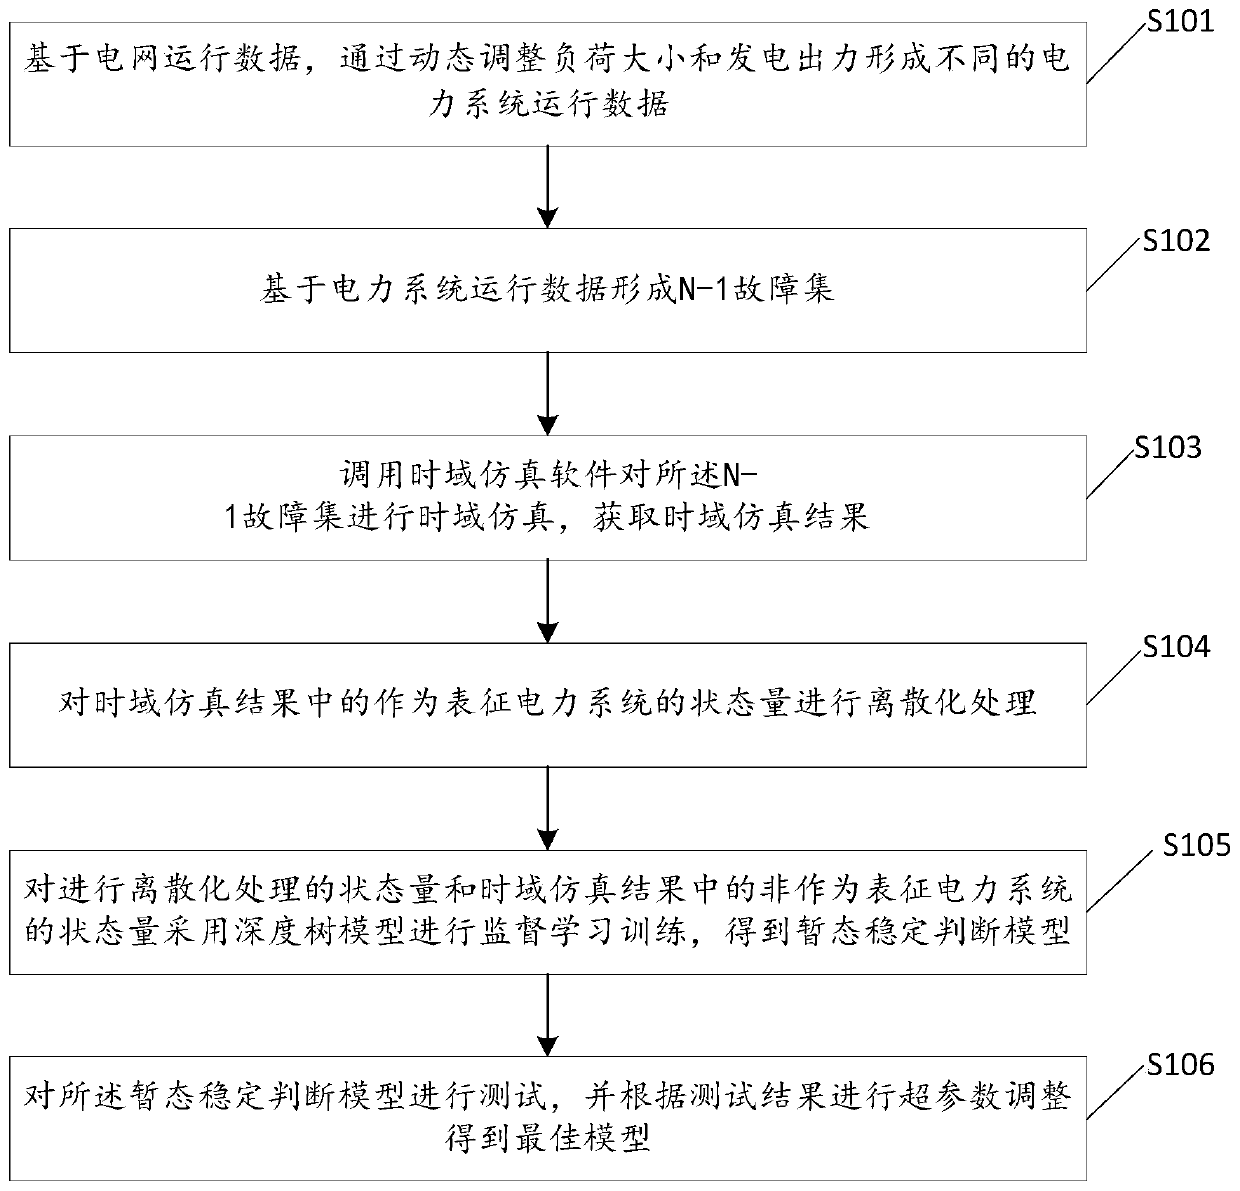 Transient stability evaluation method and system suitable for large power grid operation